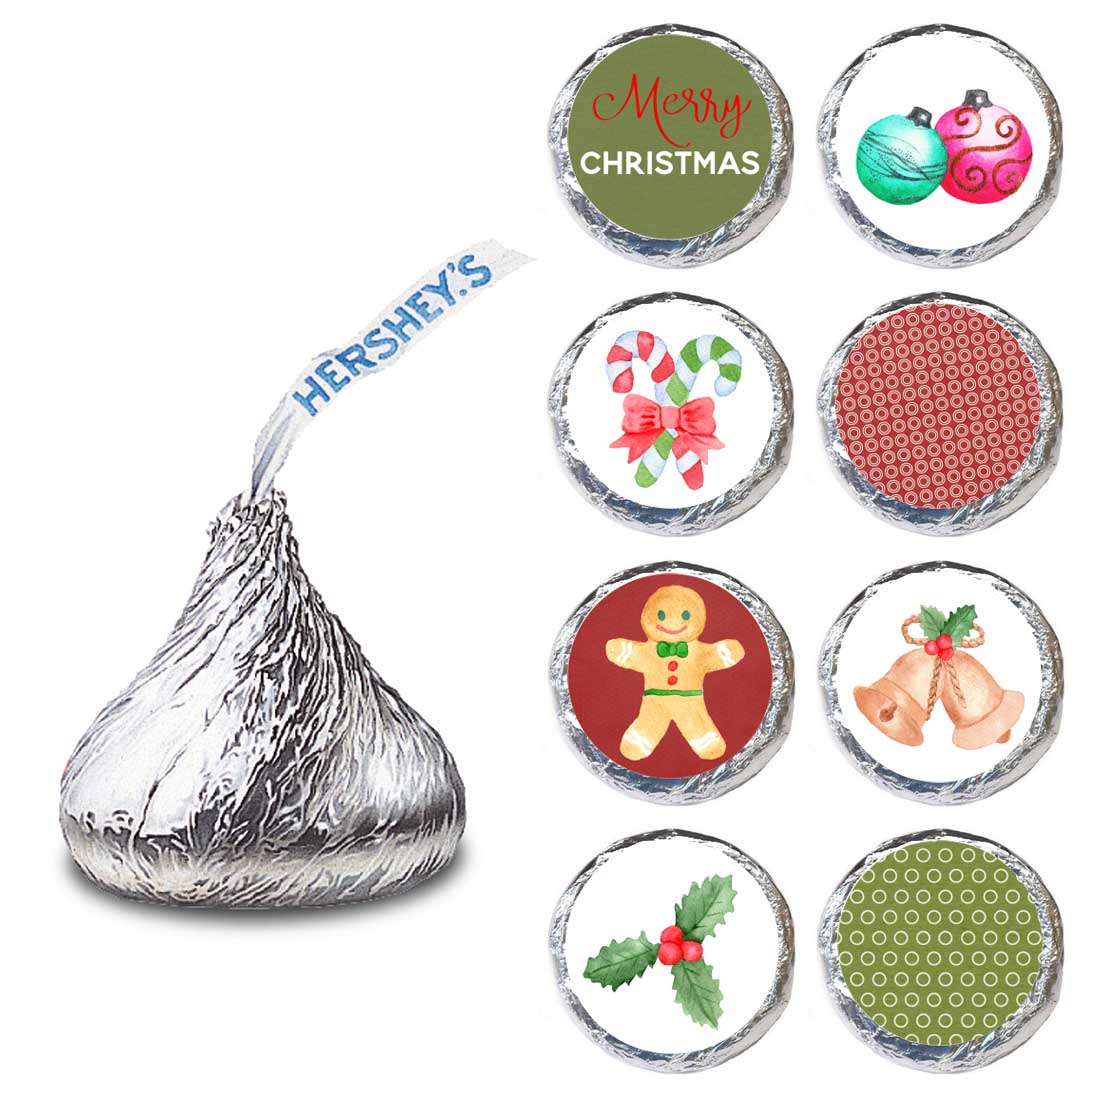 merry-christmas-label-for-hershey-s-kisses-chocolates